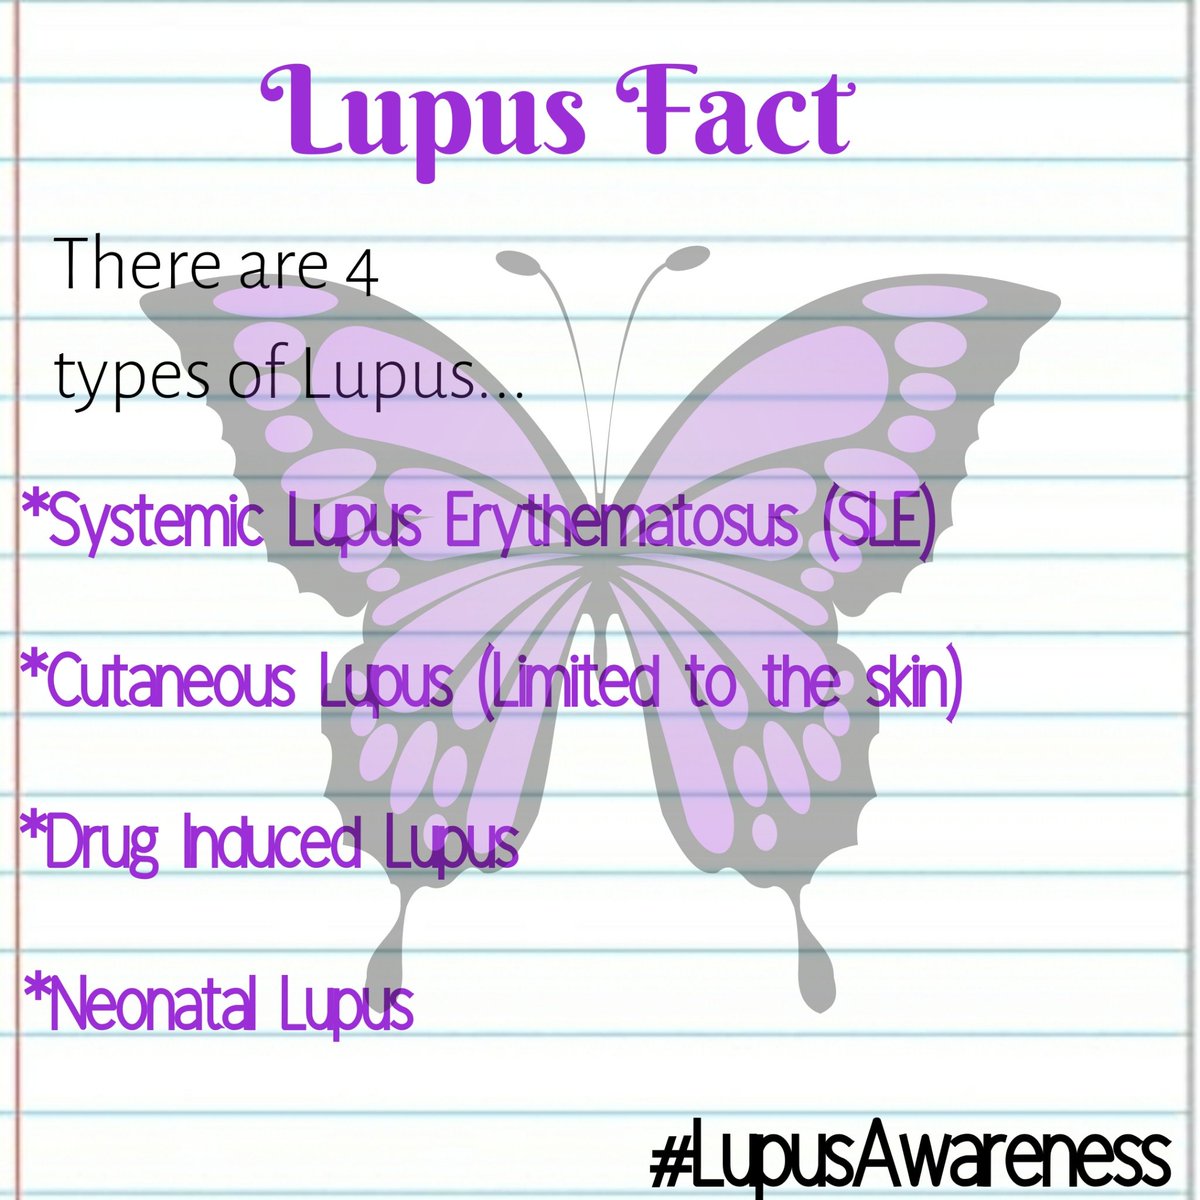 Day 2, Today I just wanted to give more insight on the different types of Lupus. 
Twitch.tv/oneomen
#OmenFam #Lupus #LupusAwareness #LupusAwarenessMonth #KnowledgeIsPower #Learn #LupusFoundationOfAmerica #CharityStream #SolvingTheCruelMystery